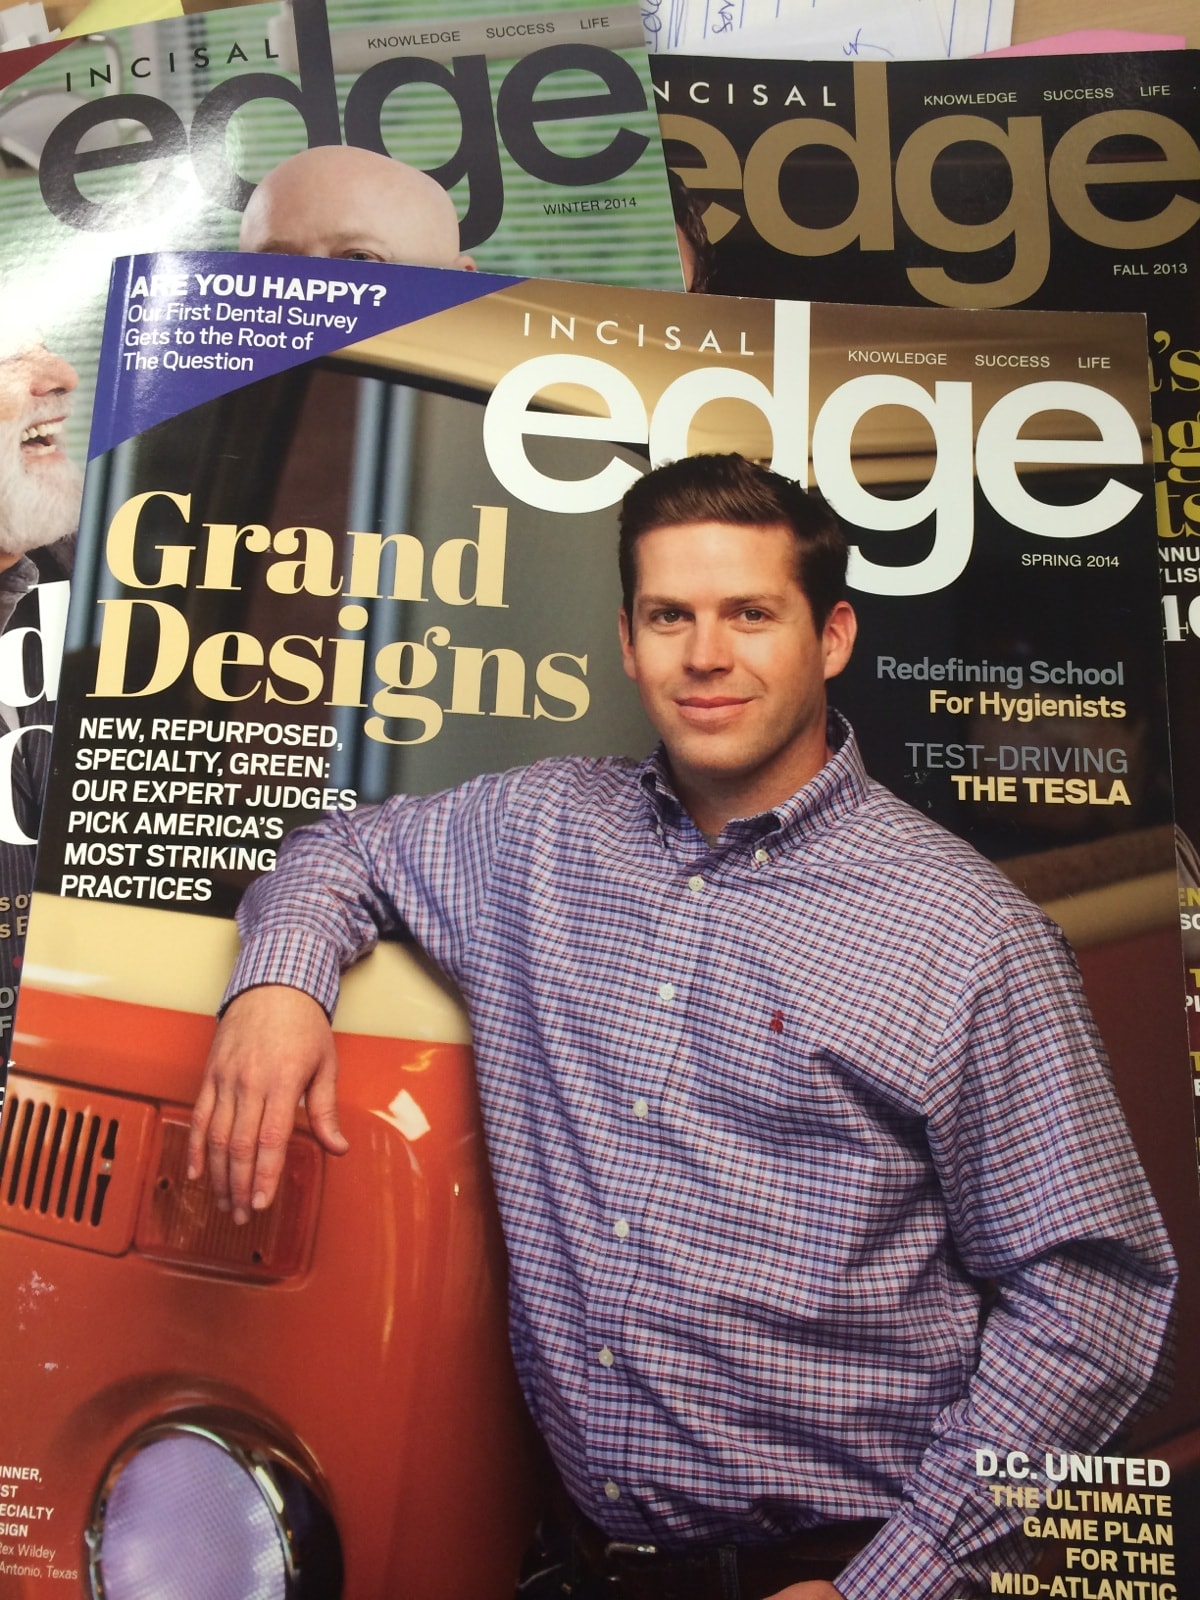 Dr. Rex Wildey graced the cover of Incisal Edge in 2014 as the Winner, Best Specialty Design for his office - Wildey Pediatric Dentistry - in San Antonio Texas.